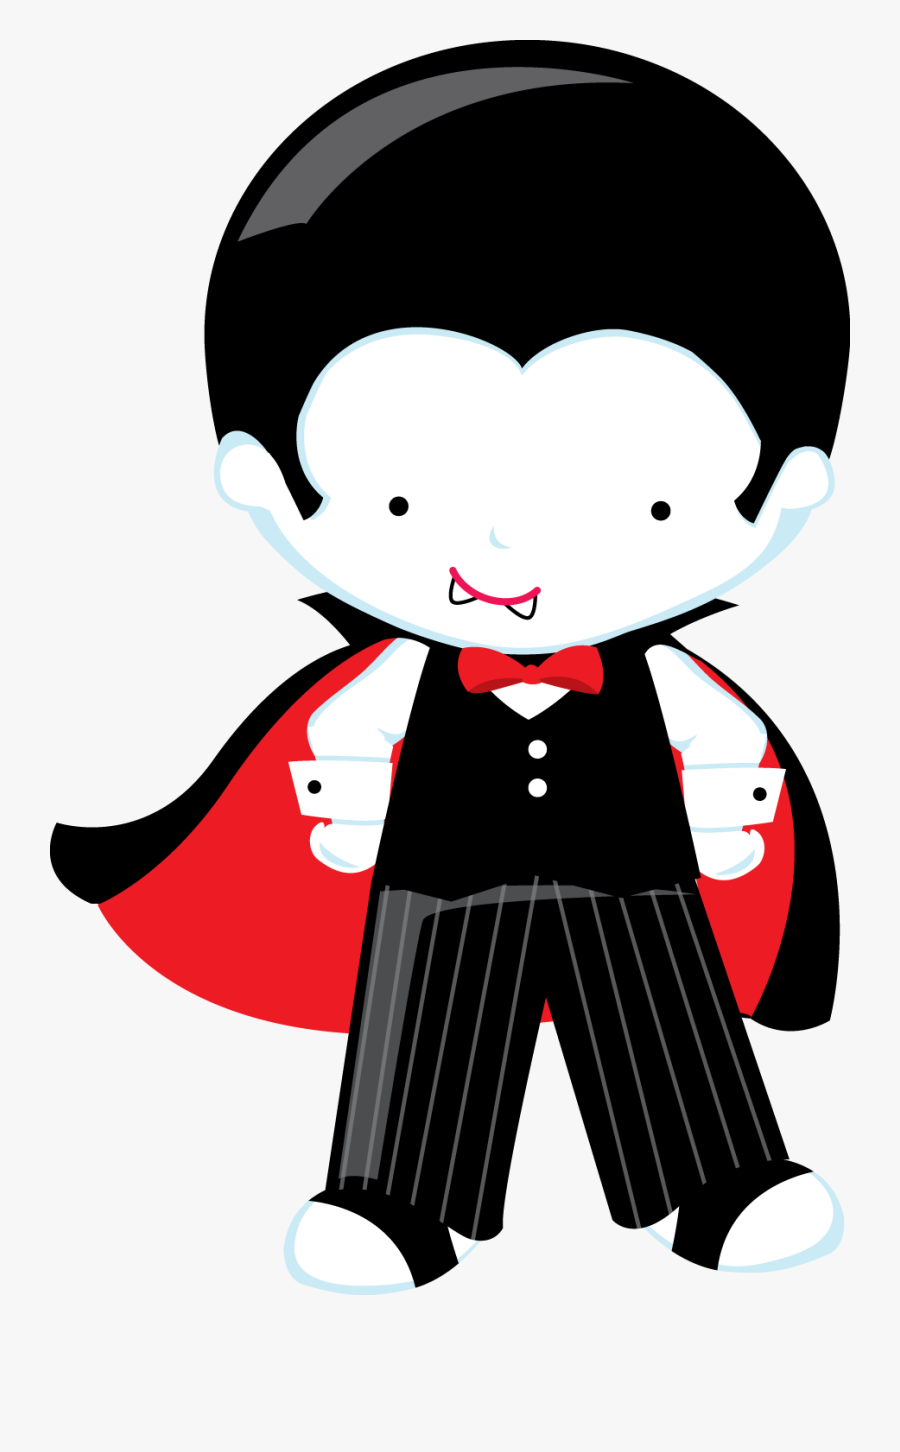 Zwd Witch Dracula Png, Transparent Clipart